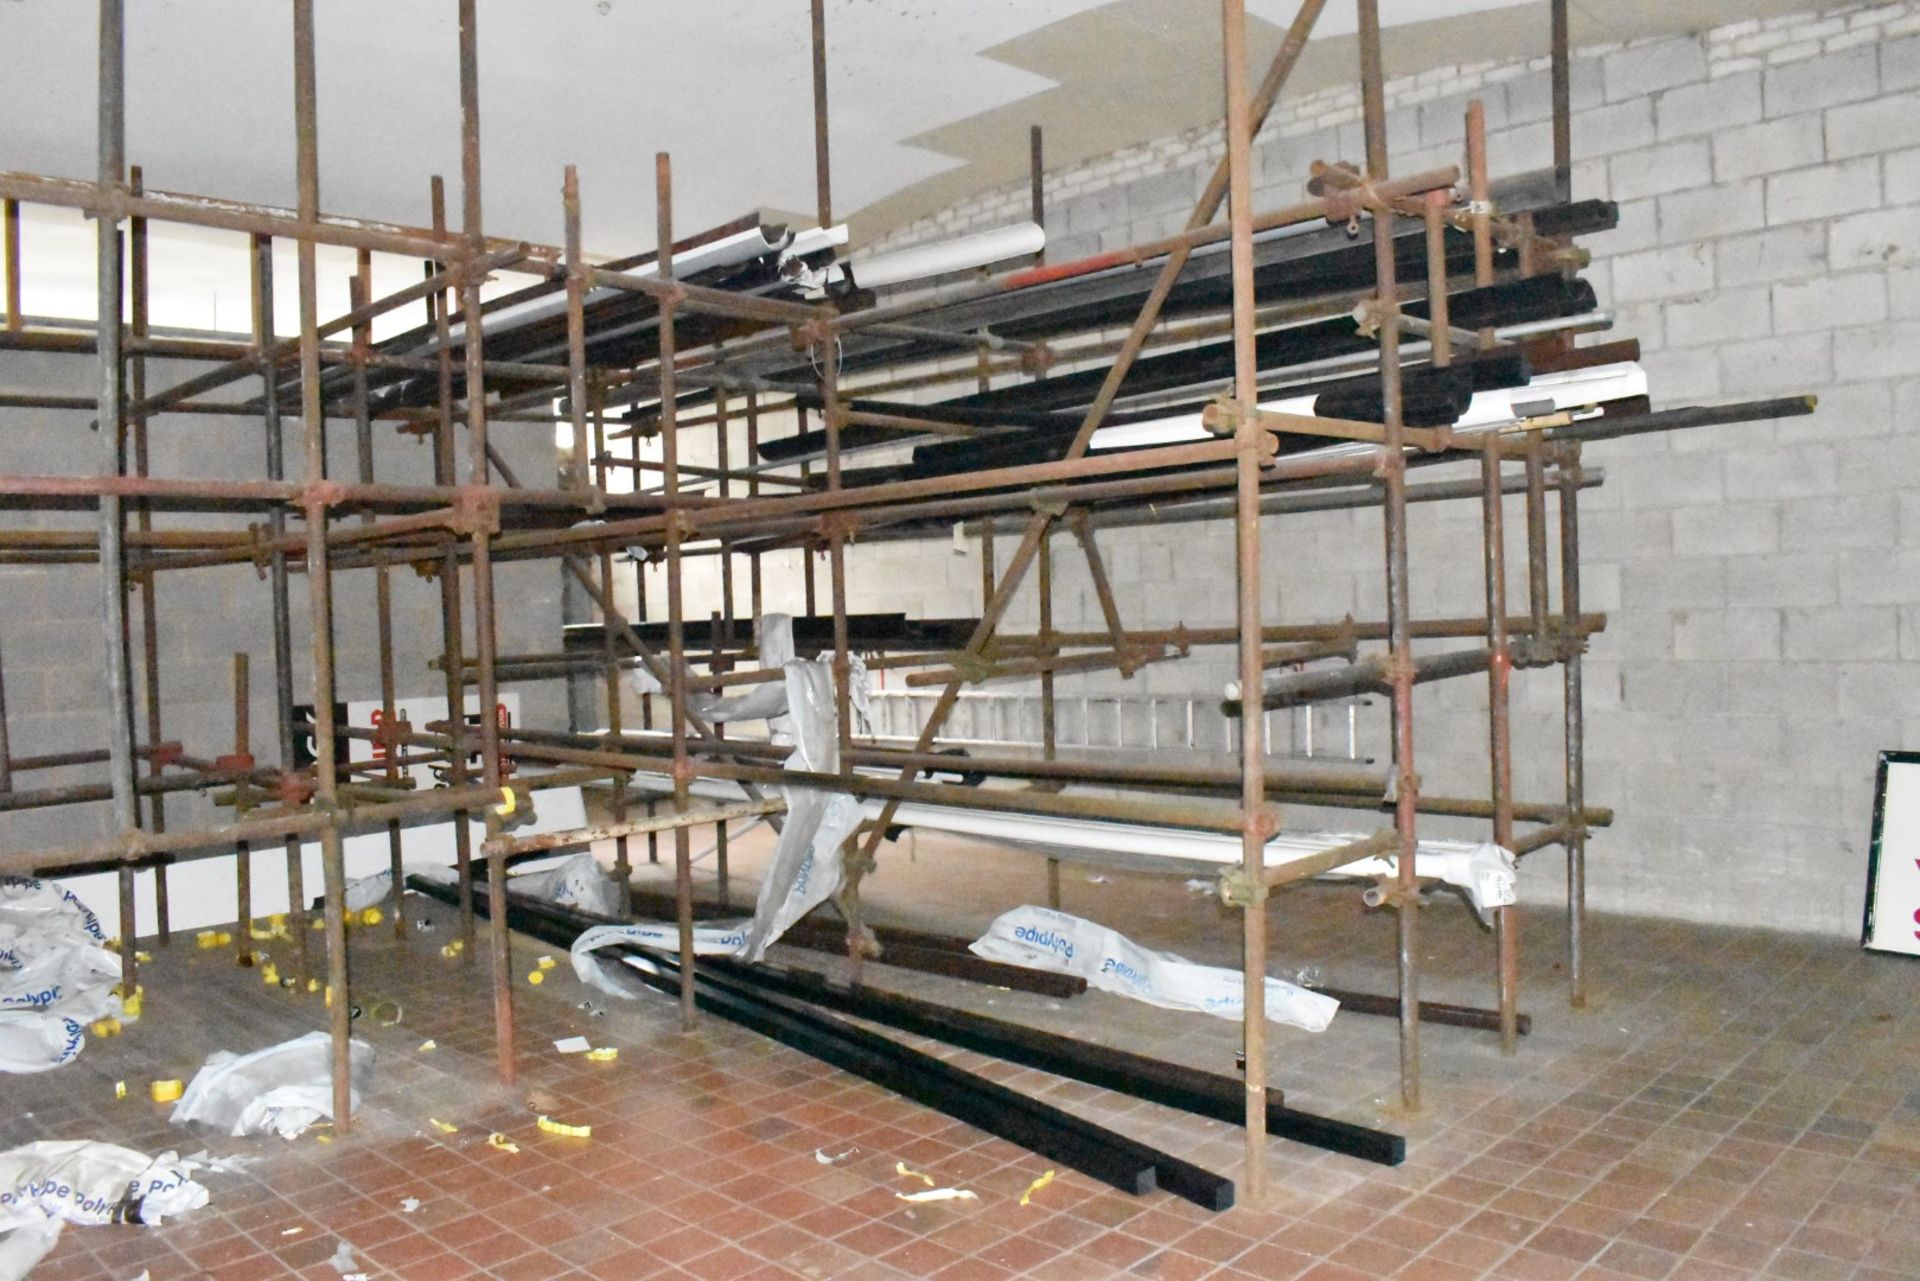 1 x Large Collection of Scaffolding and Fixtures Covering a Floor Space of Approx 13 x 13ft - Image 3 of 15